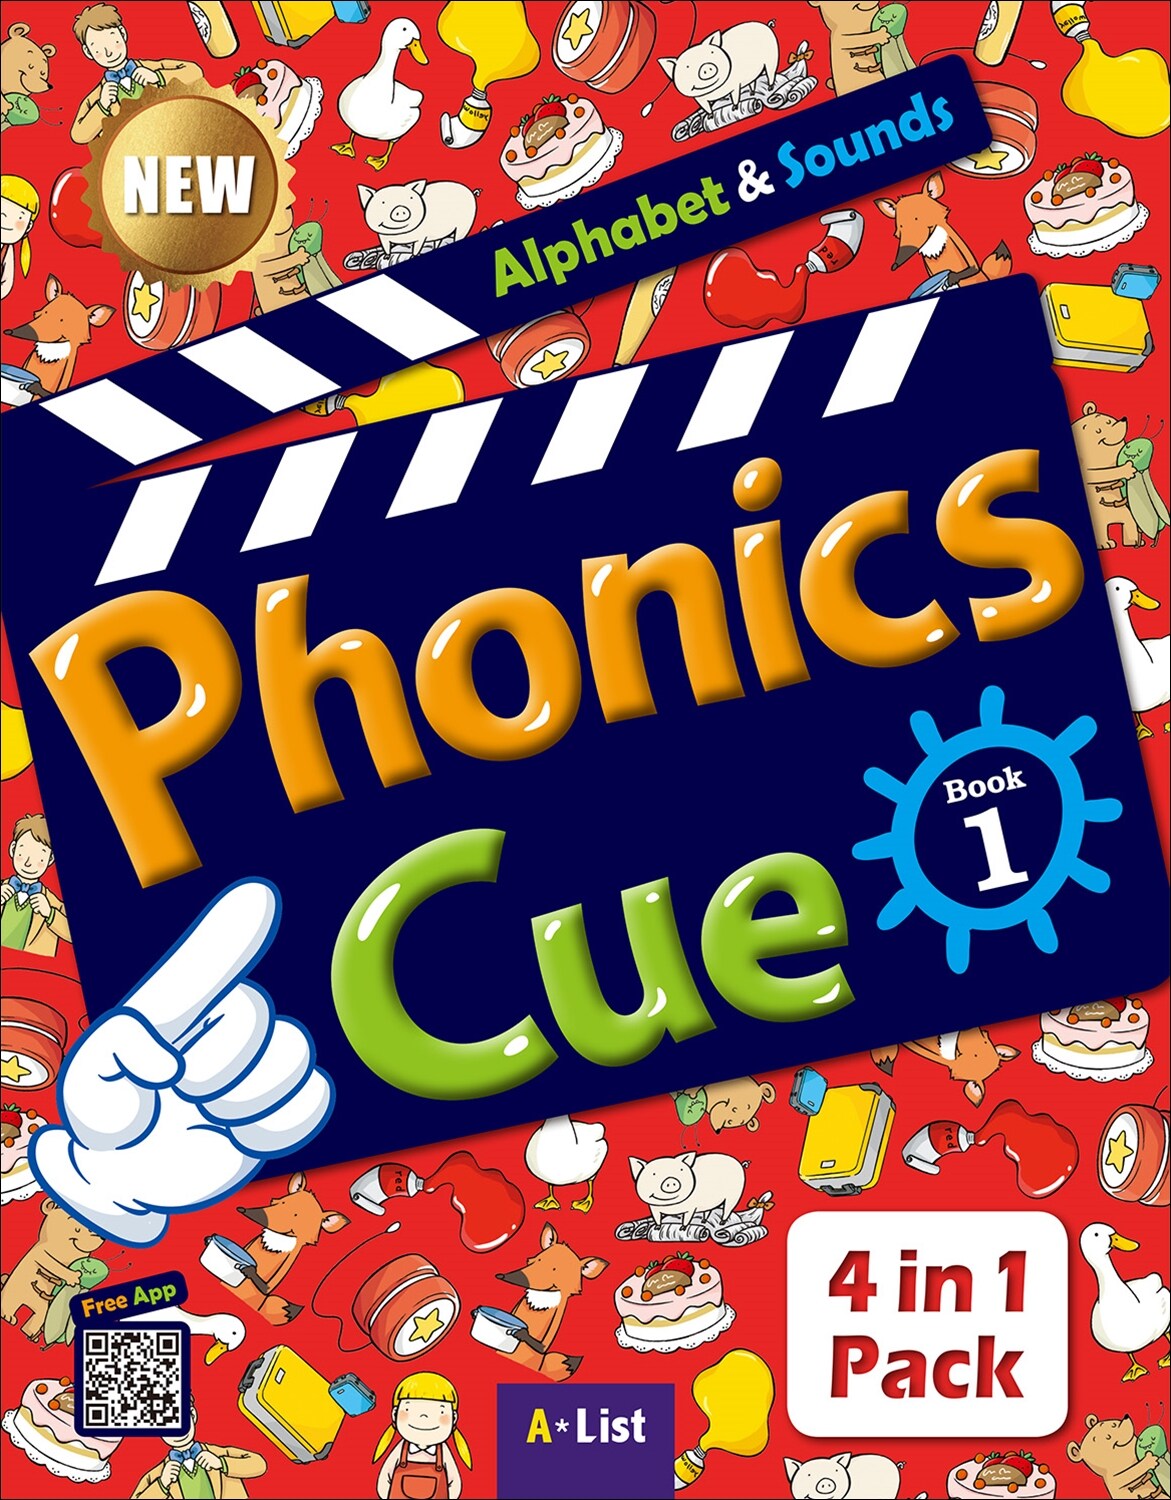 Phonics Cue 1 : StudentBook with App (Workbook + Activity Worksheet, New Edition)